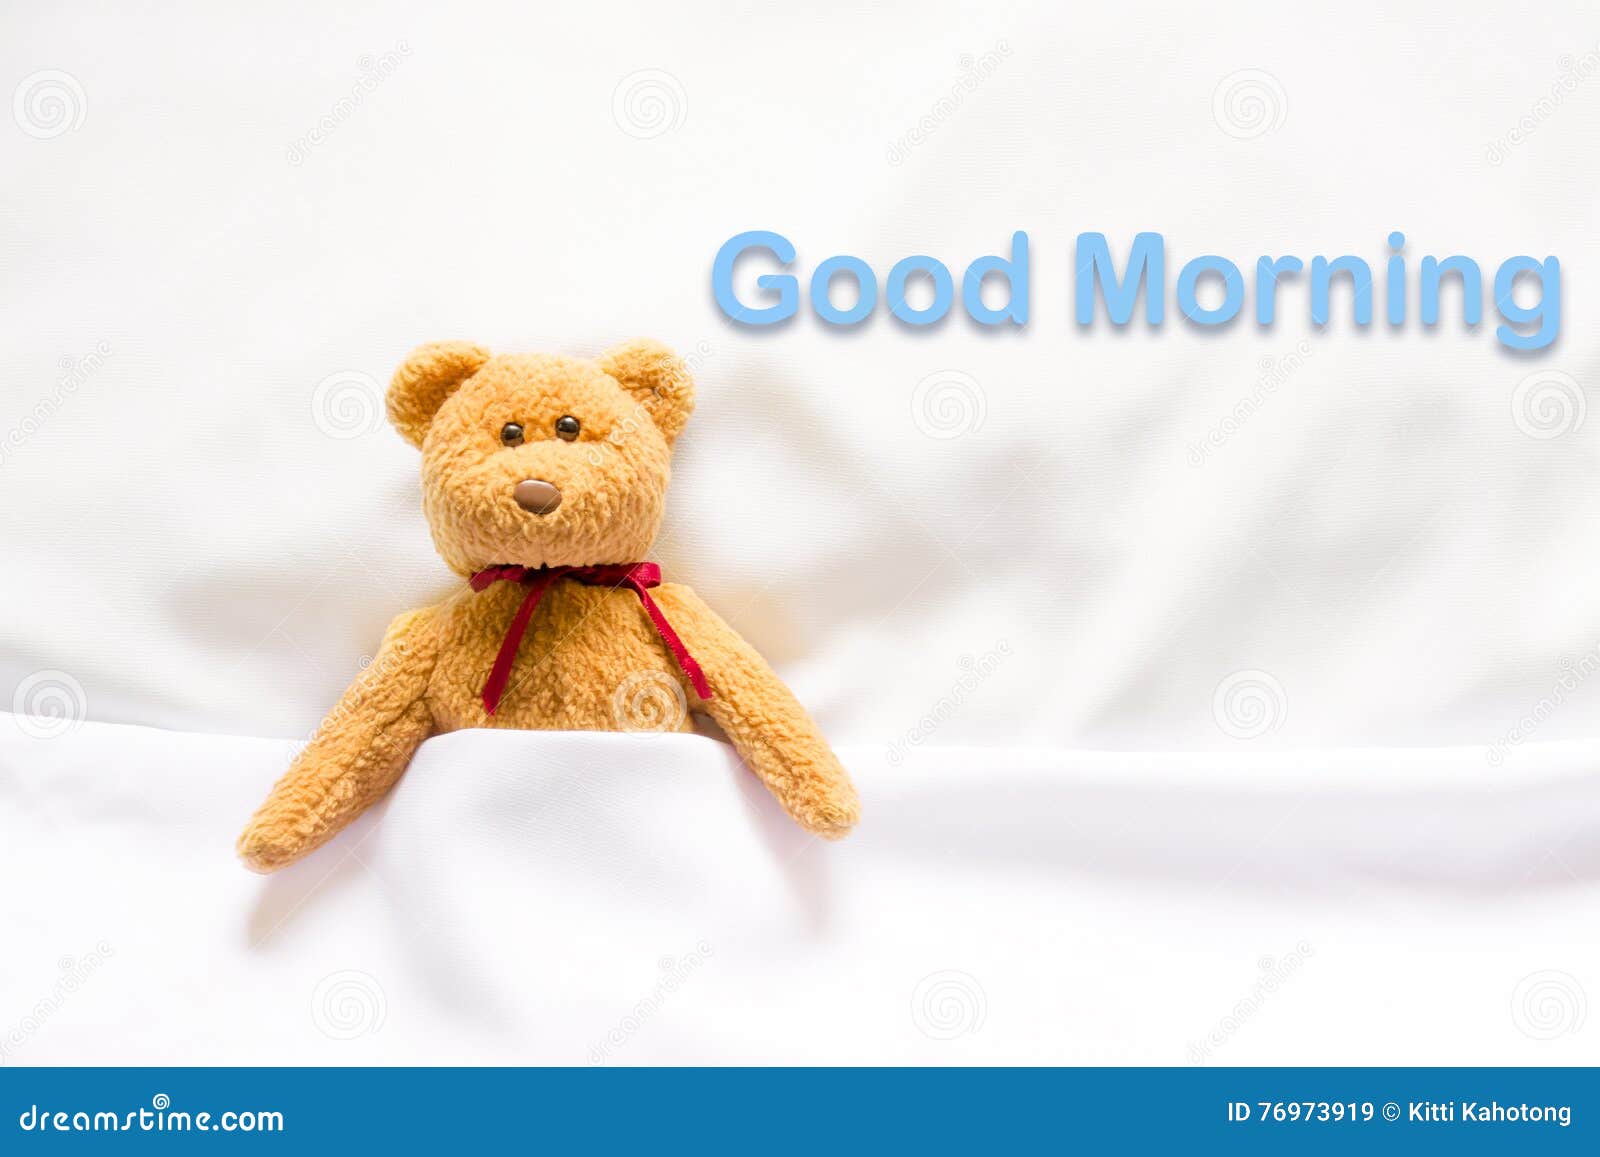 Teddy Bear Lying in the White Bed with Message 